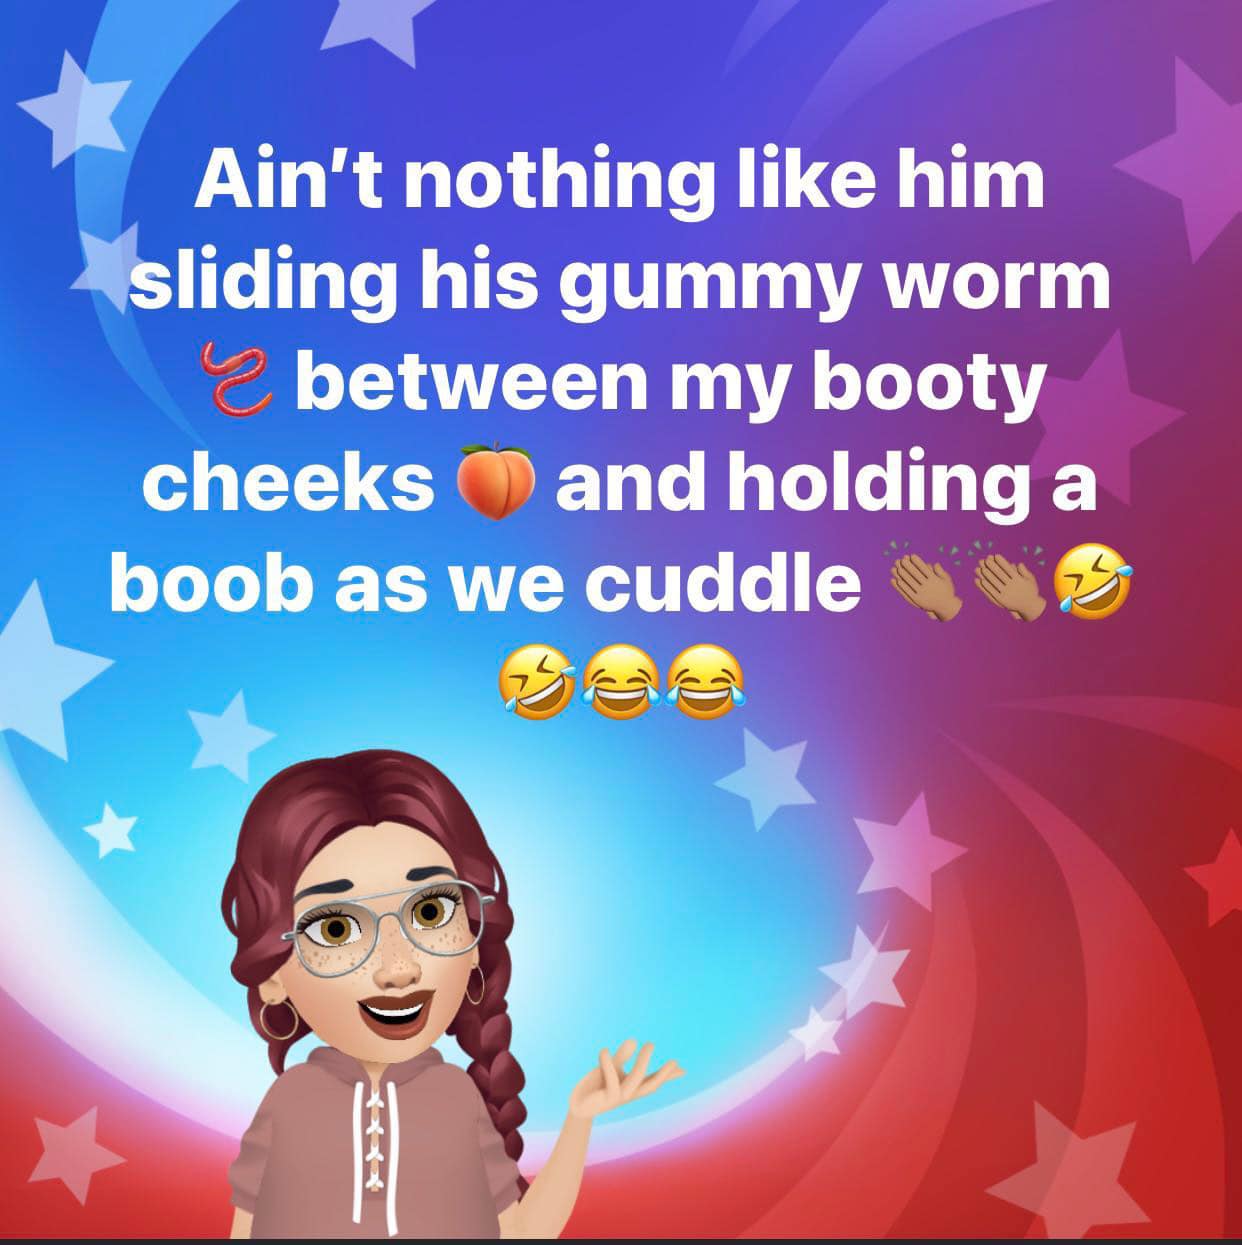 Don’t let him let go of the boob or scoot back 🙄😒😂